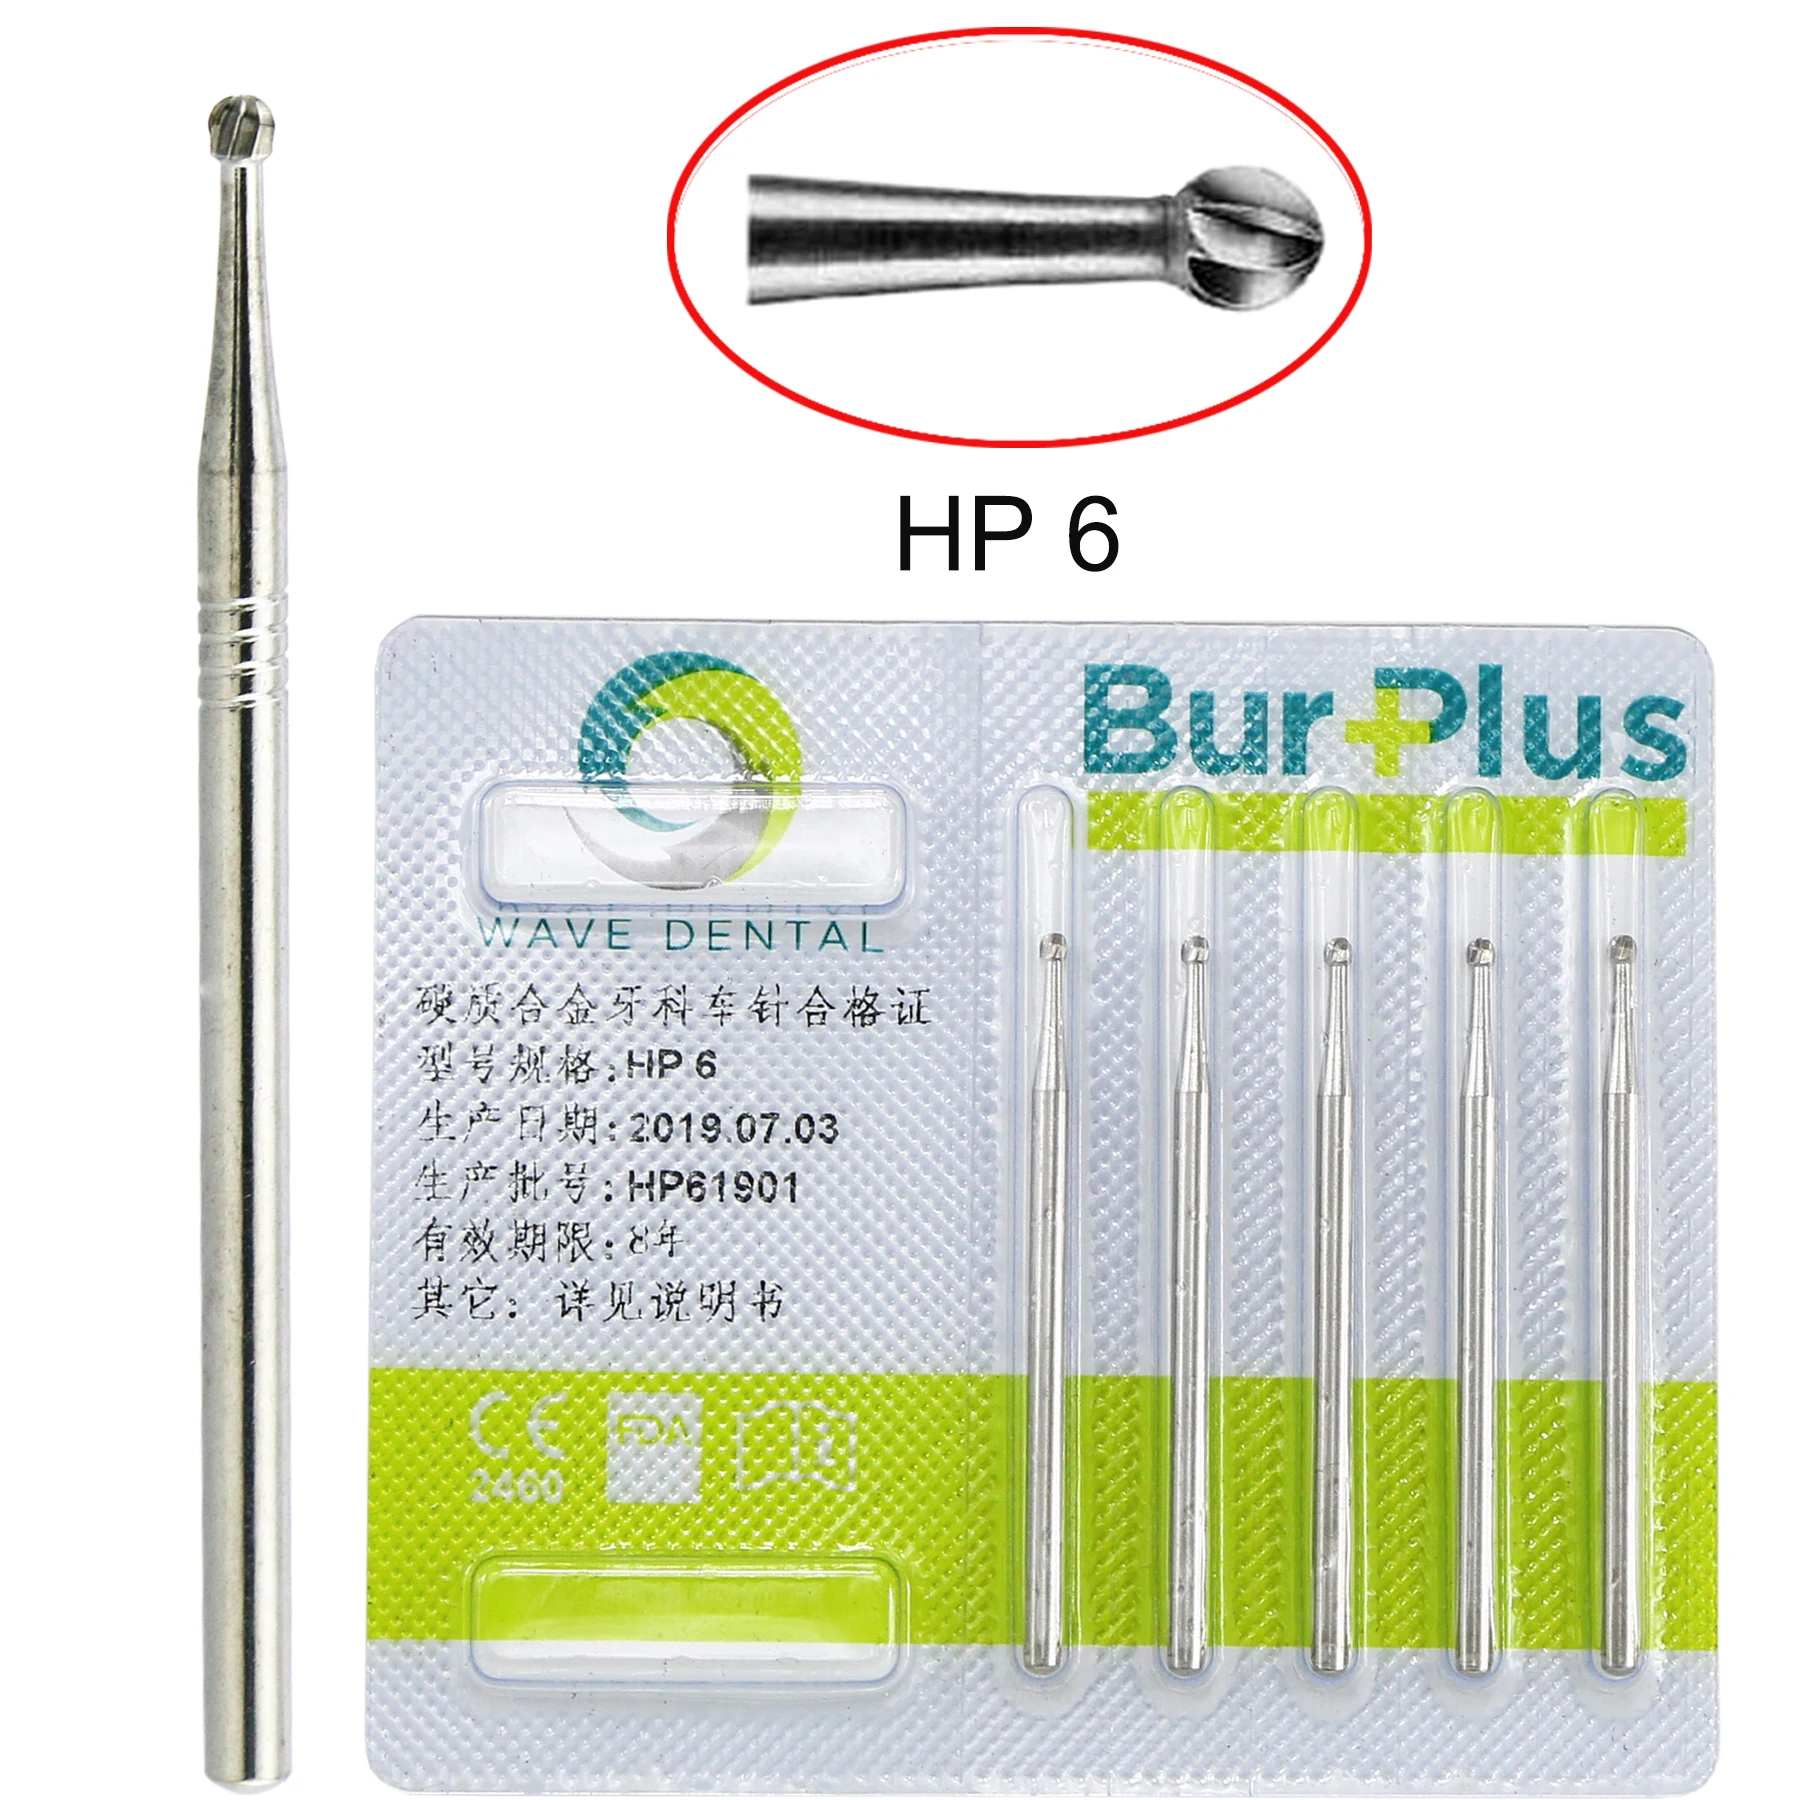 

Wave Dental Tungsten Carbide Burs HP 6 5/10PCS For Straight Handpiece Straight Nose Cone